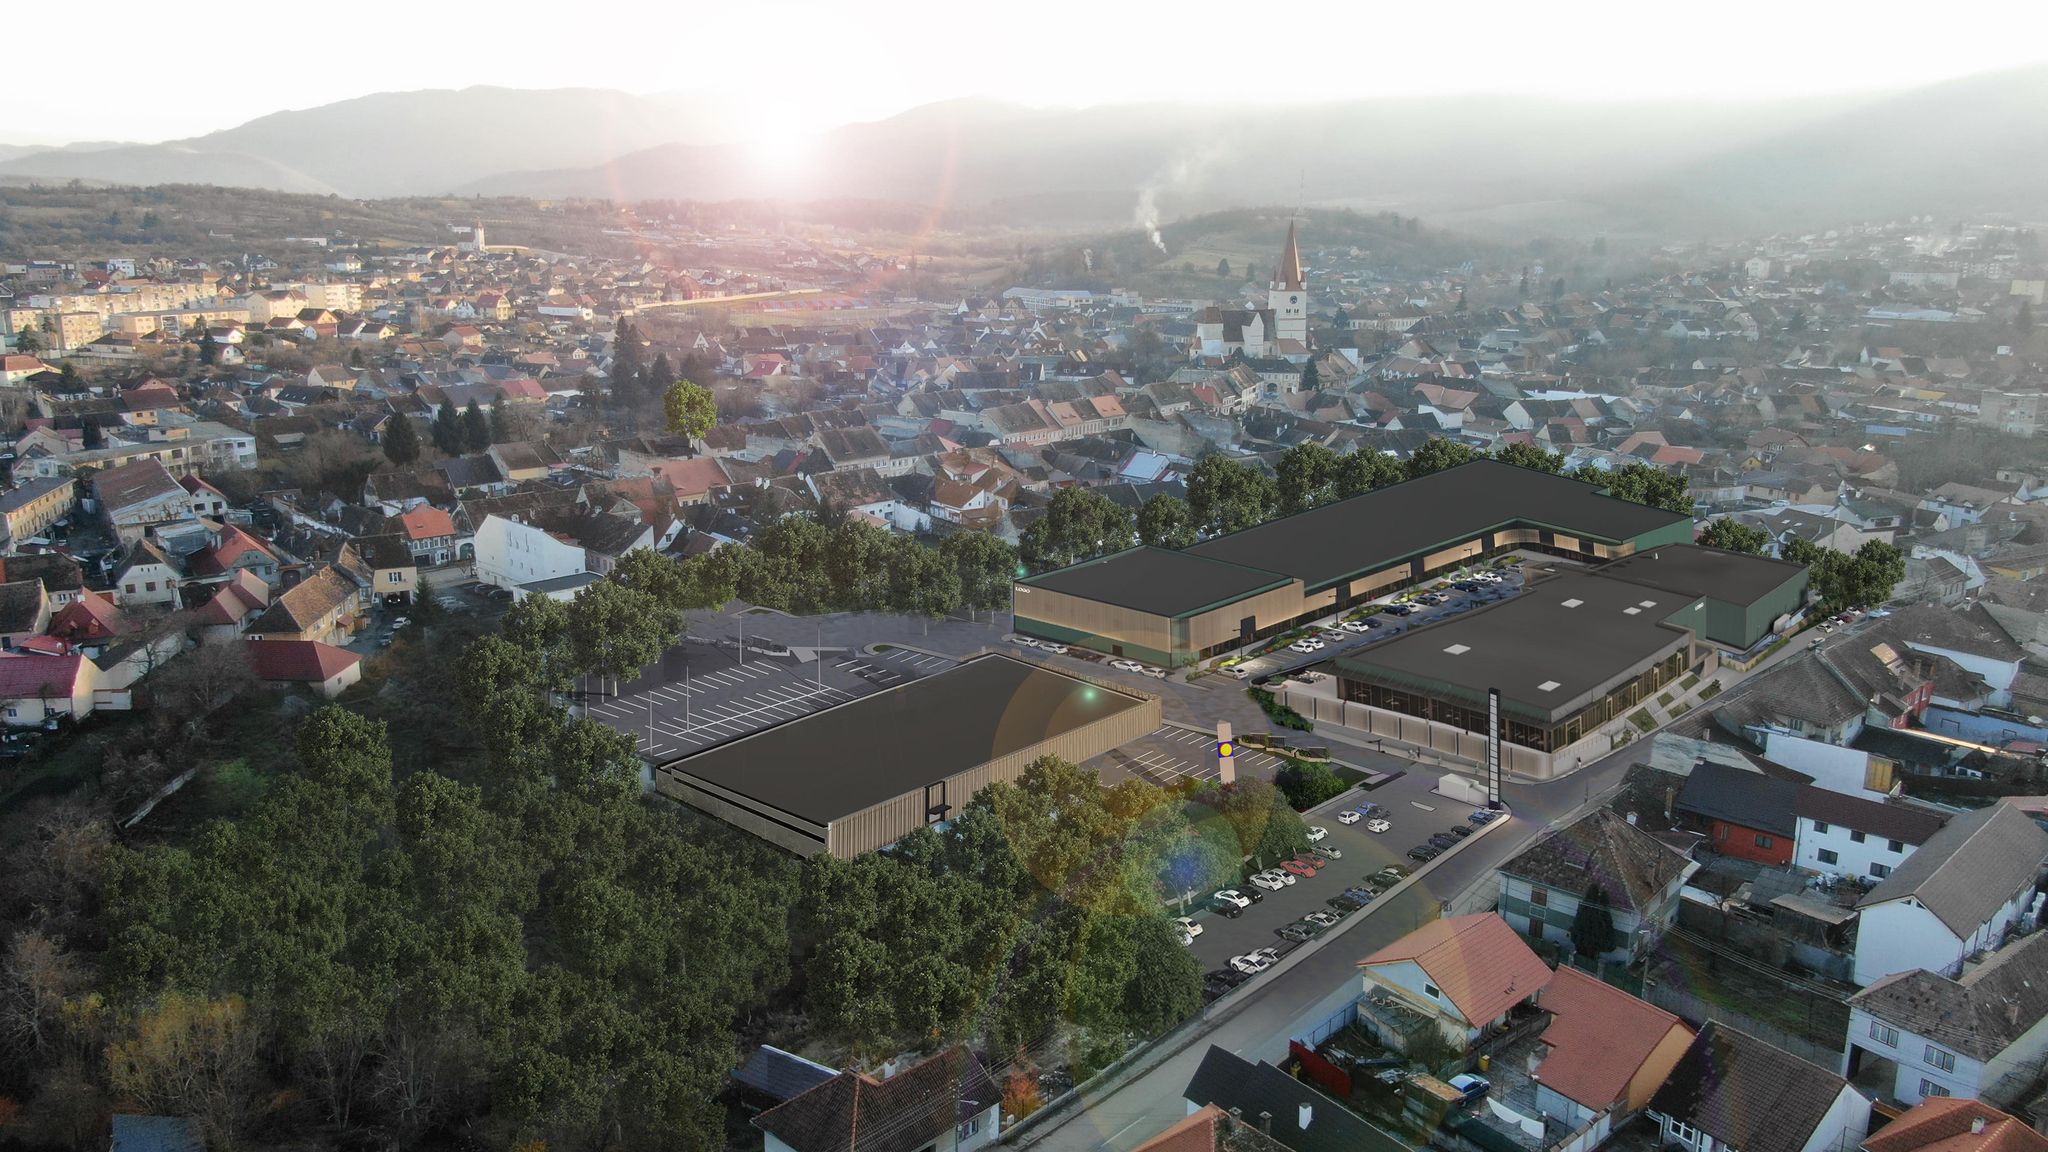 Zacaria Retail Park Cisnădie to be opened near Sibiu, after an investment of 11 million euros